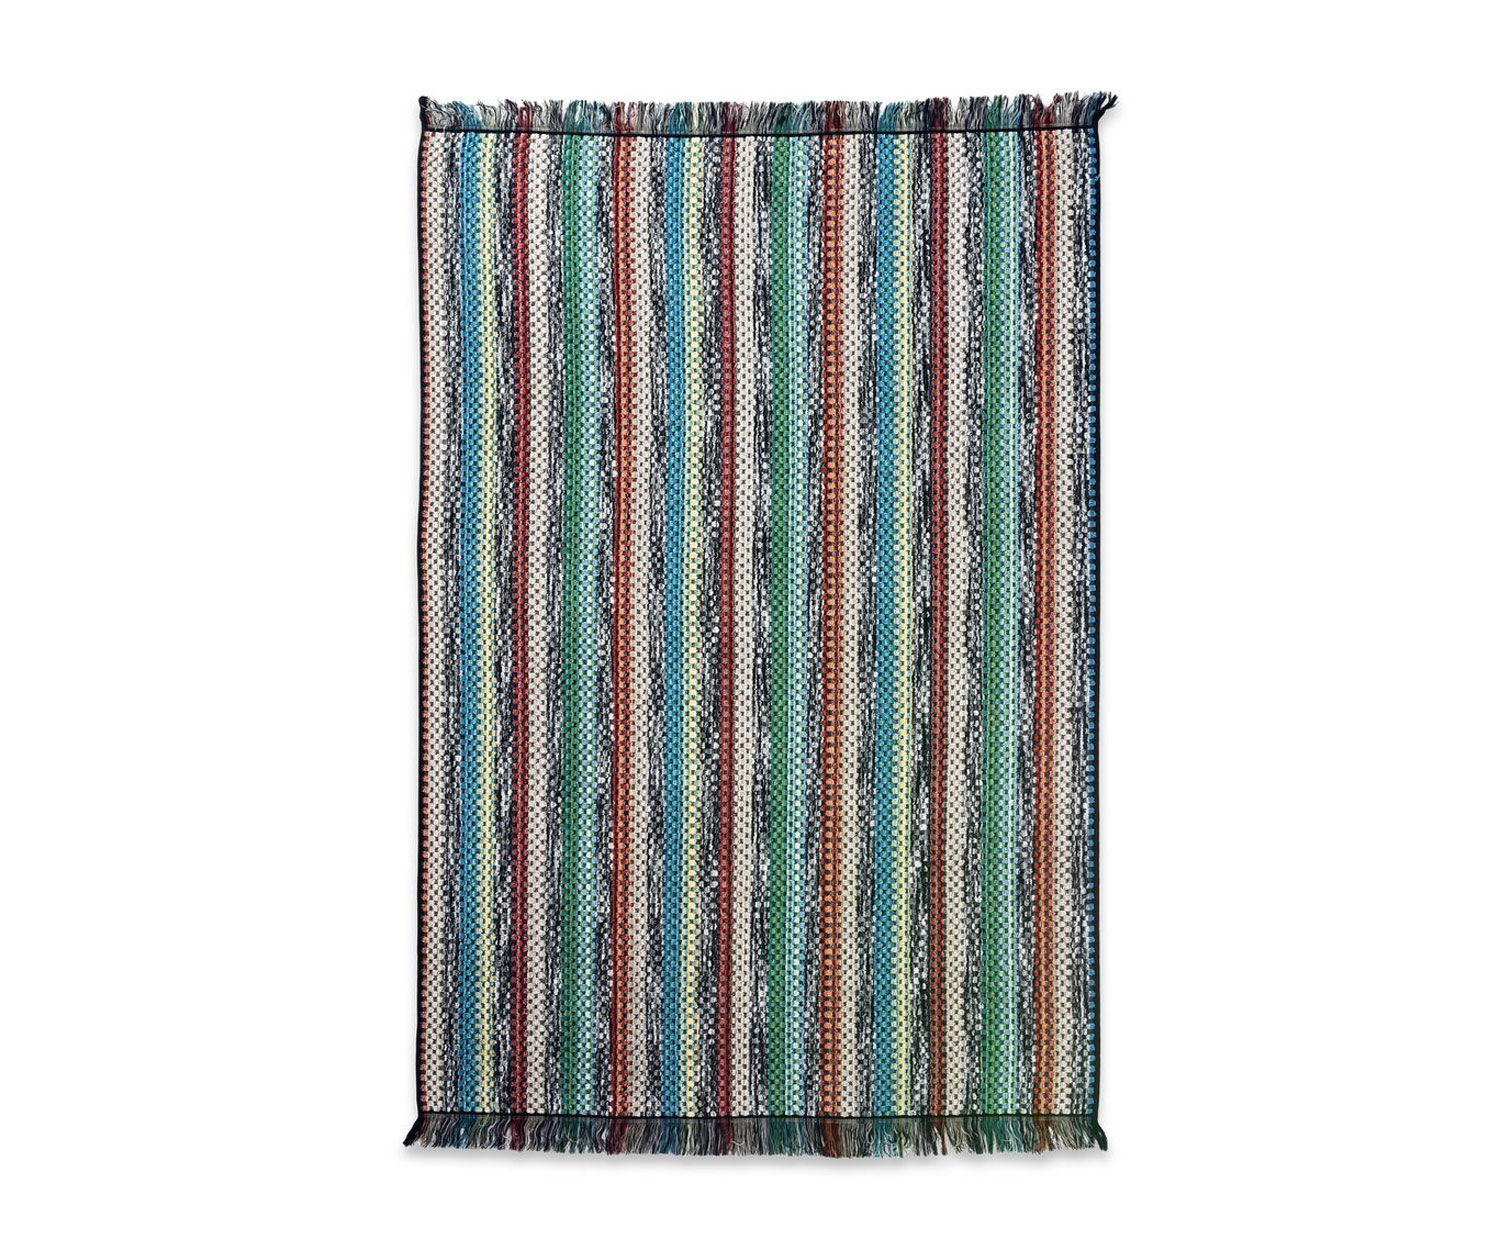 Missoni Home Virginio towels order online now | MARC LEOPOLD